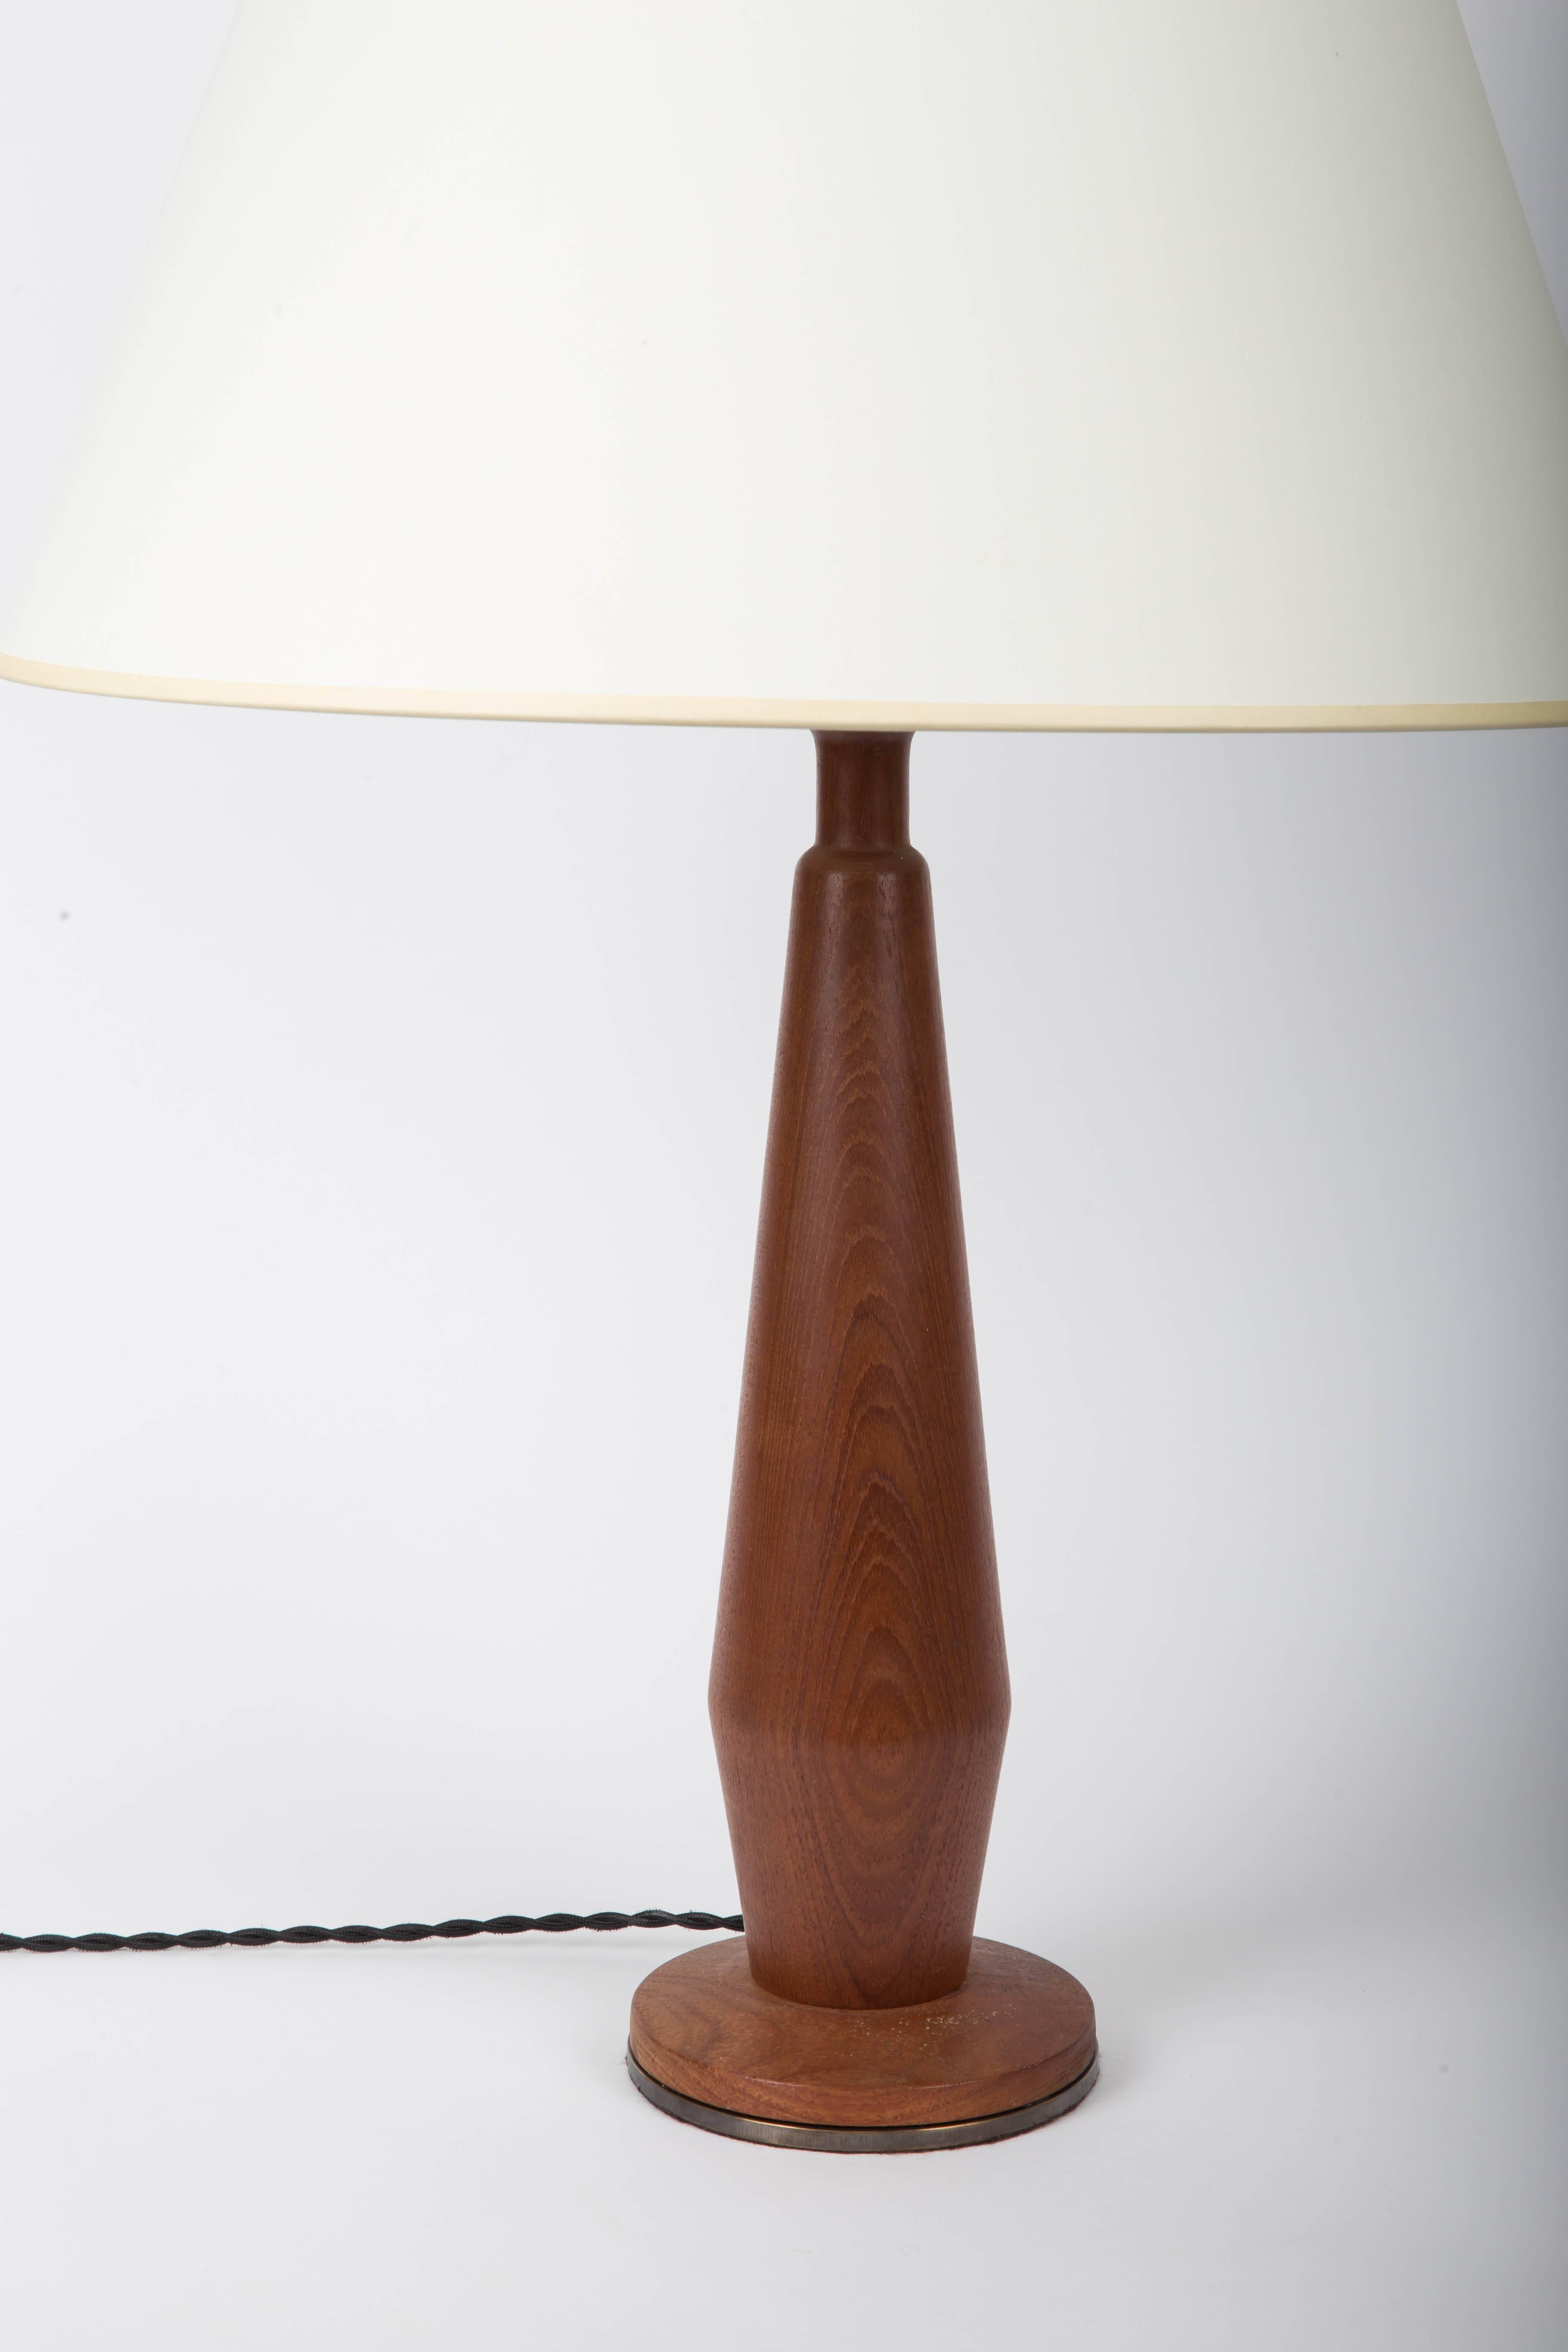 20th Century Pair of Teak Lamps with Bronze Bases